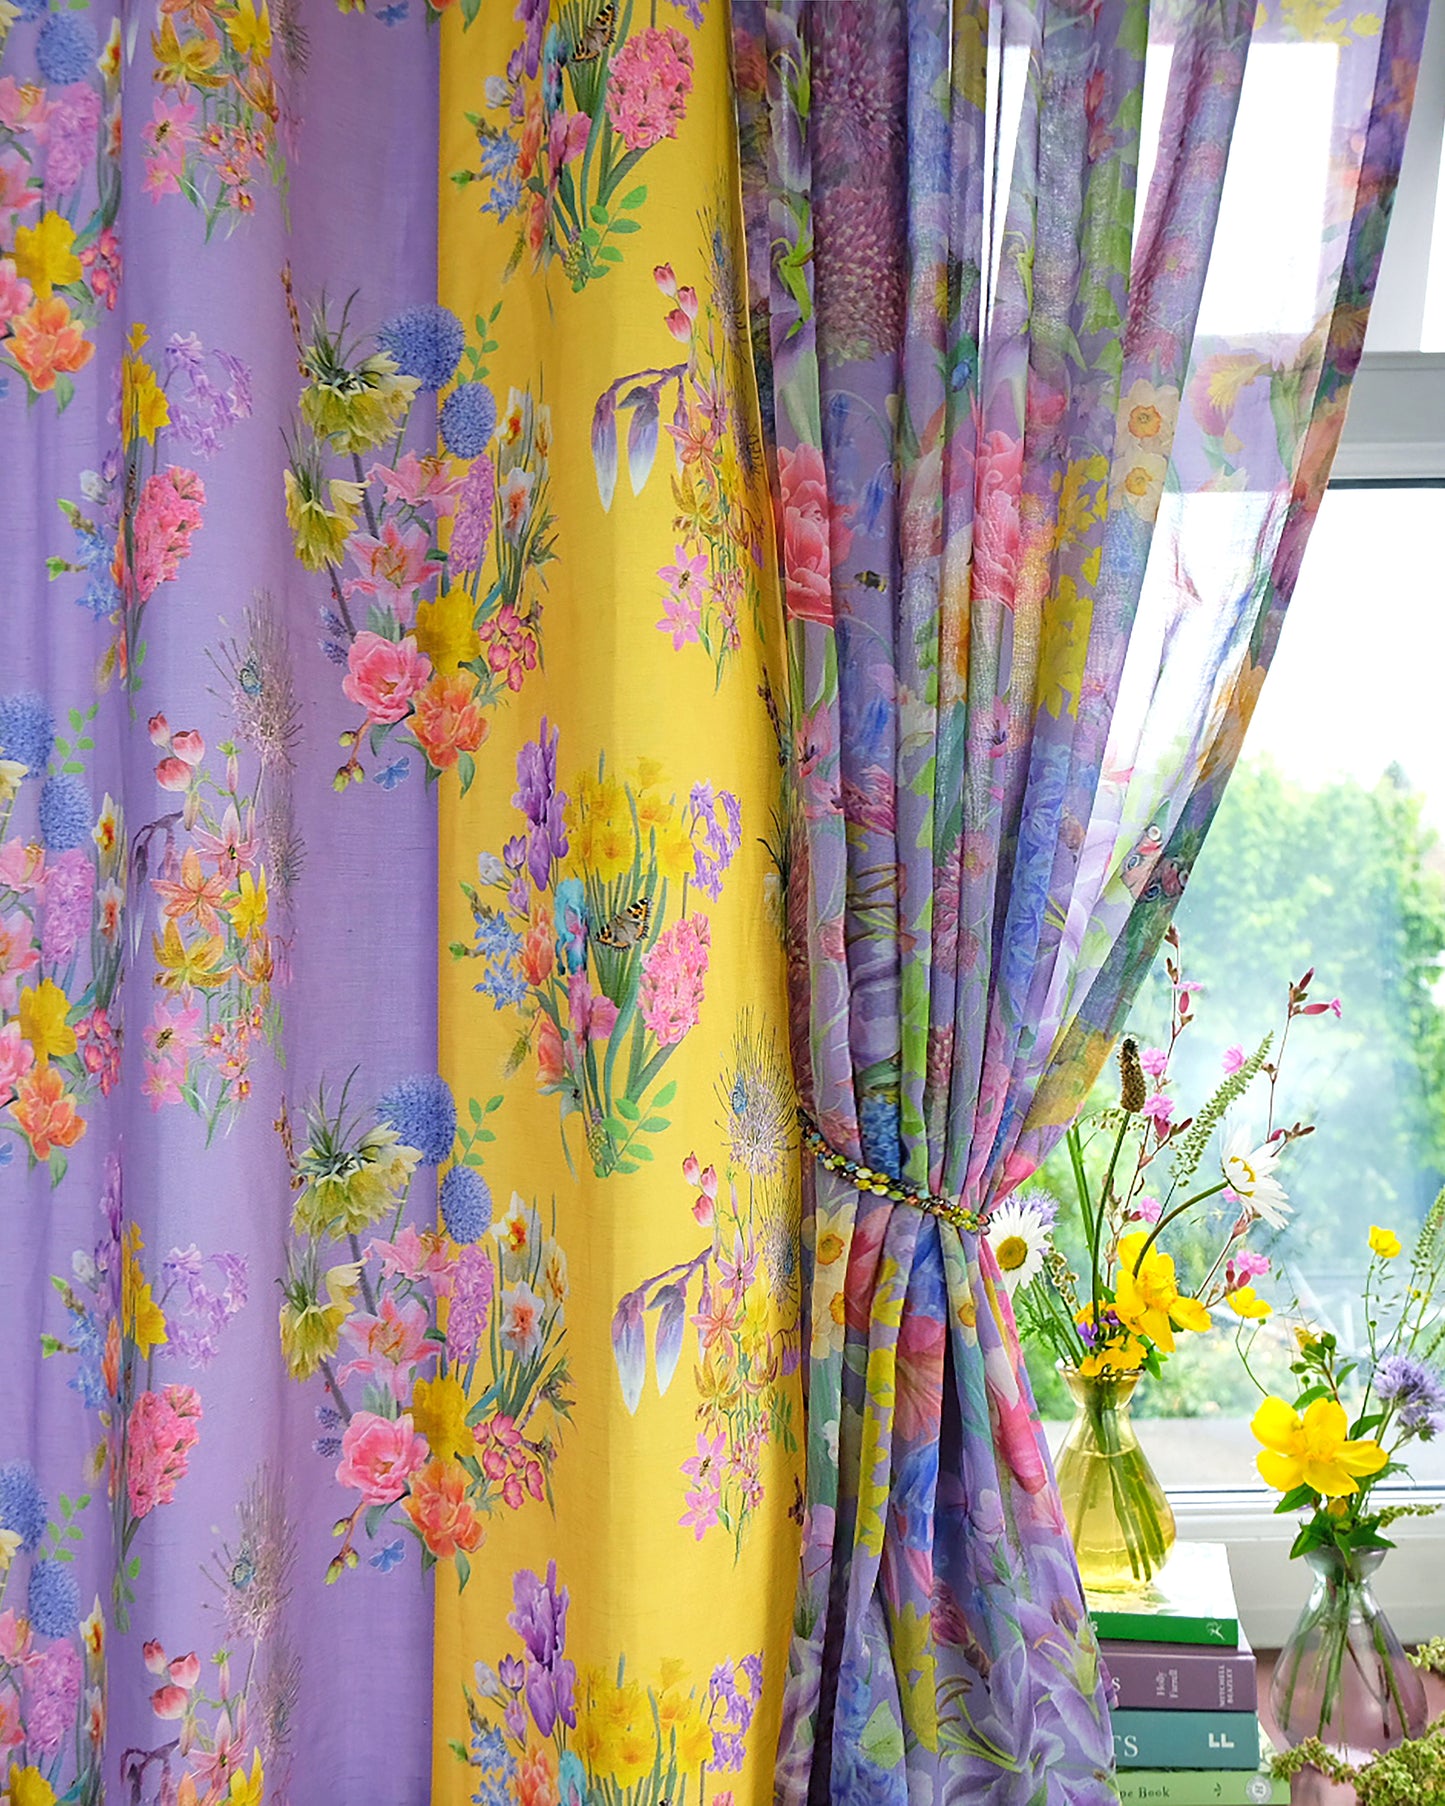 window with purple and yellow sustainable curtains in floral patterns